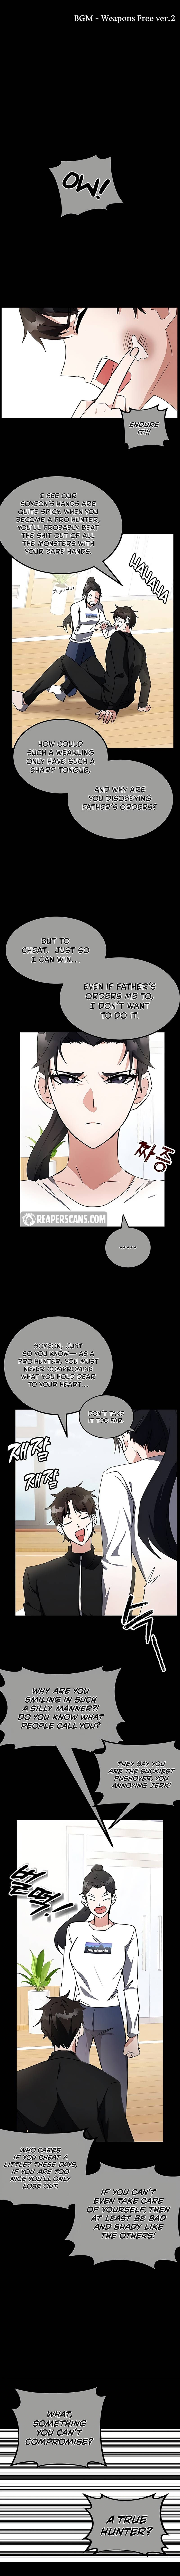 Transcension Academy Chapter 22 page 2